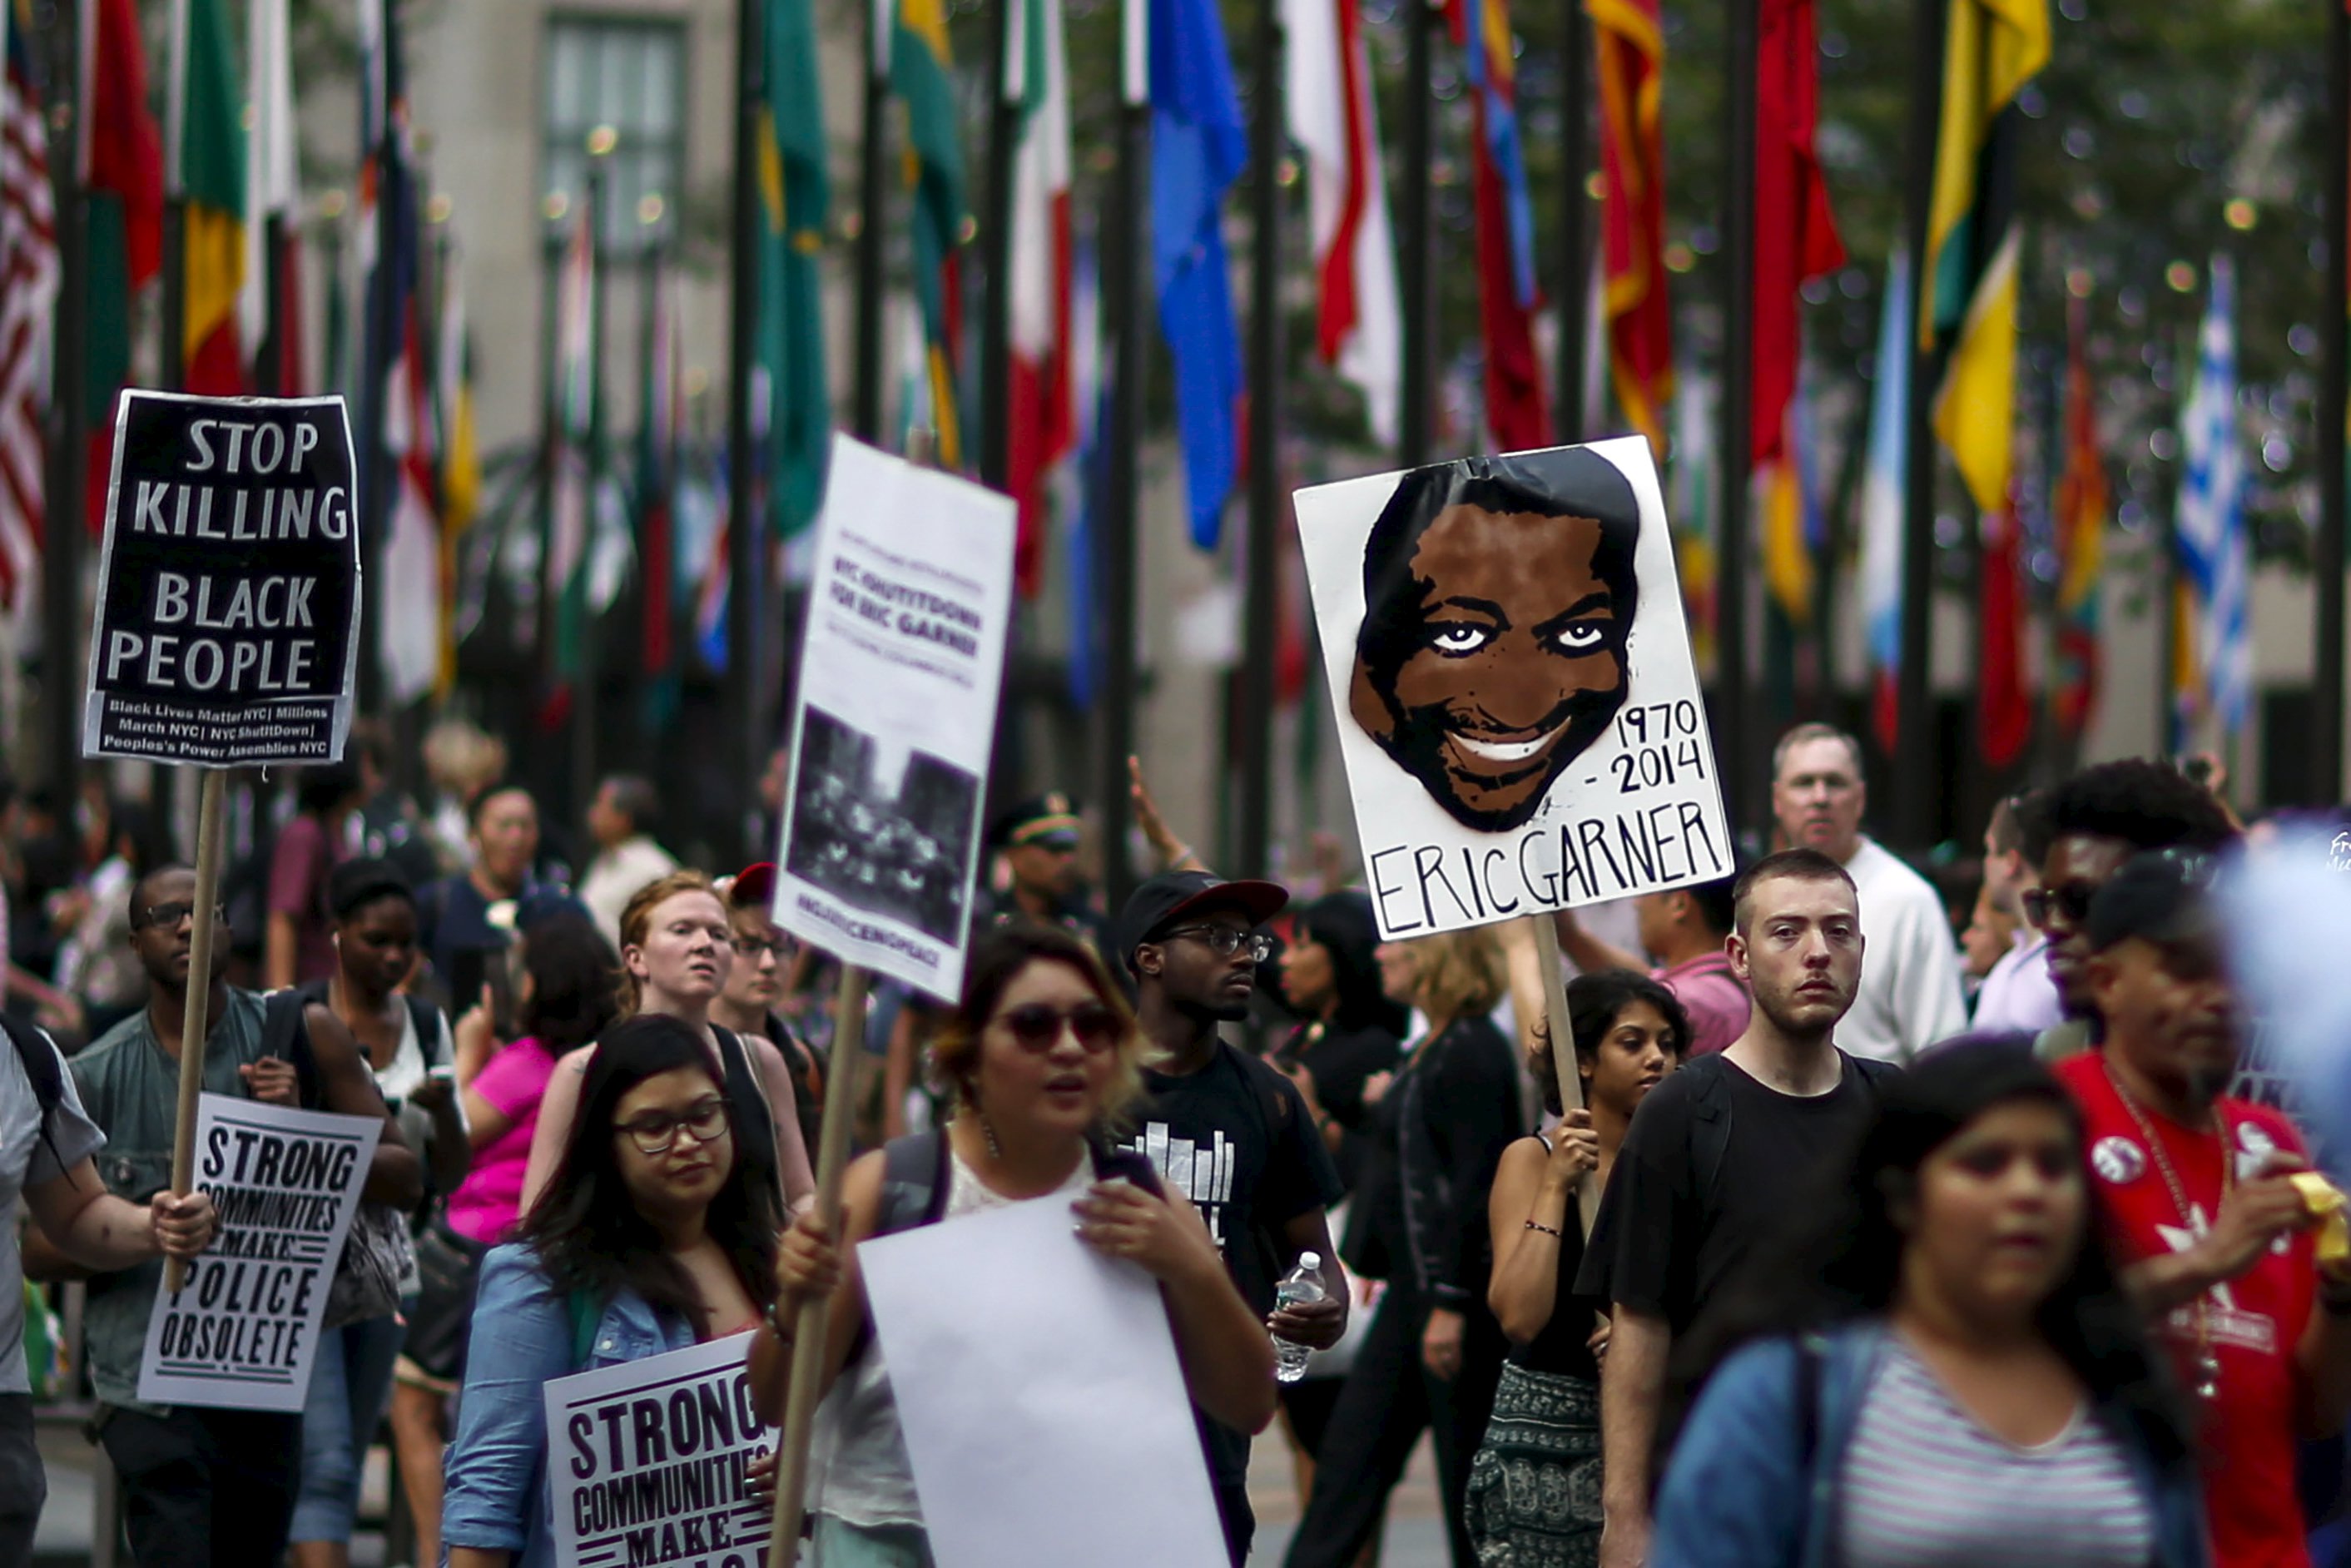 Protester march for Eric Garner who was killed one year ago by police in New York July 17, 2015. Family and supporters on Friday marked the anniversary of the police killing of Eric Garner with rallies and vigils demanding police reforms and justice in the controversial case. REUTERS/Eduardo Munoz